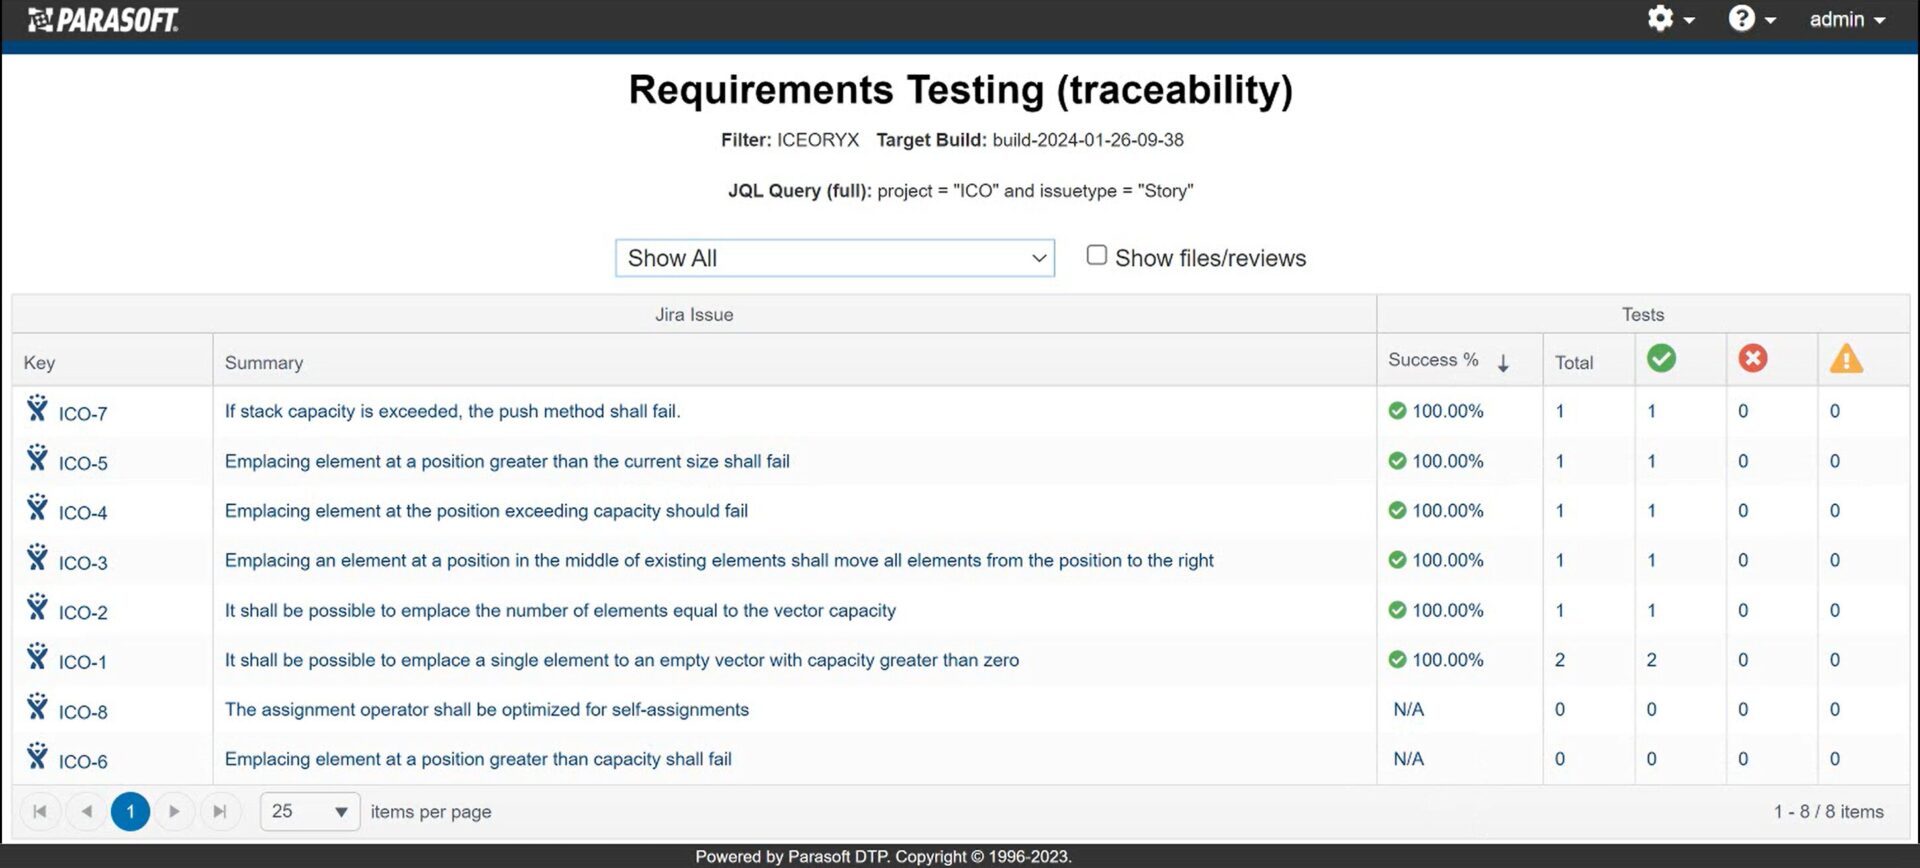 Screenshot of Parasoft C/C++test CT Requirements Testing traceability, linking test cases and verifying test execution results.